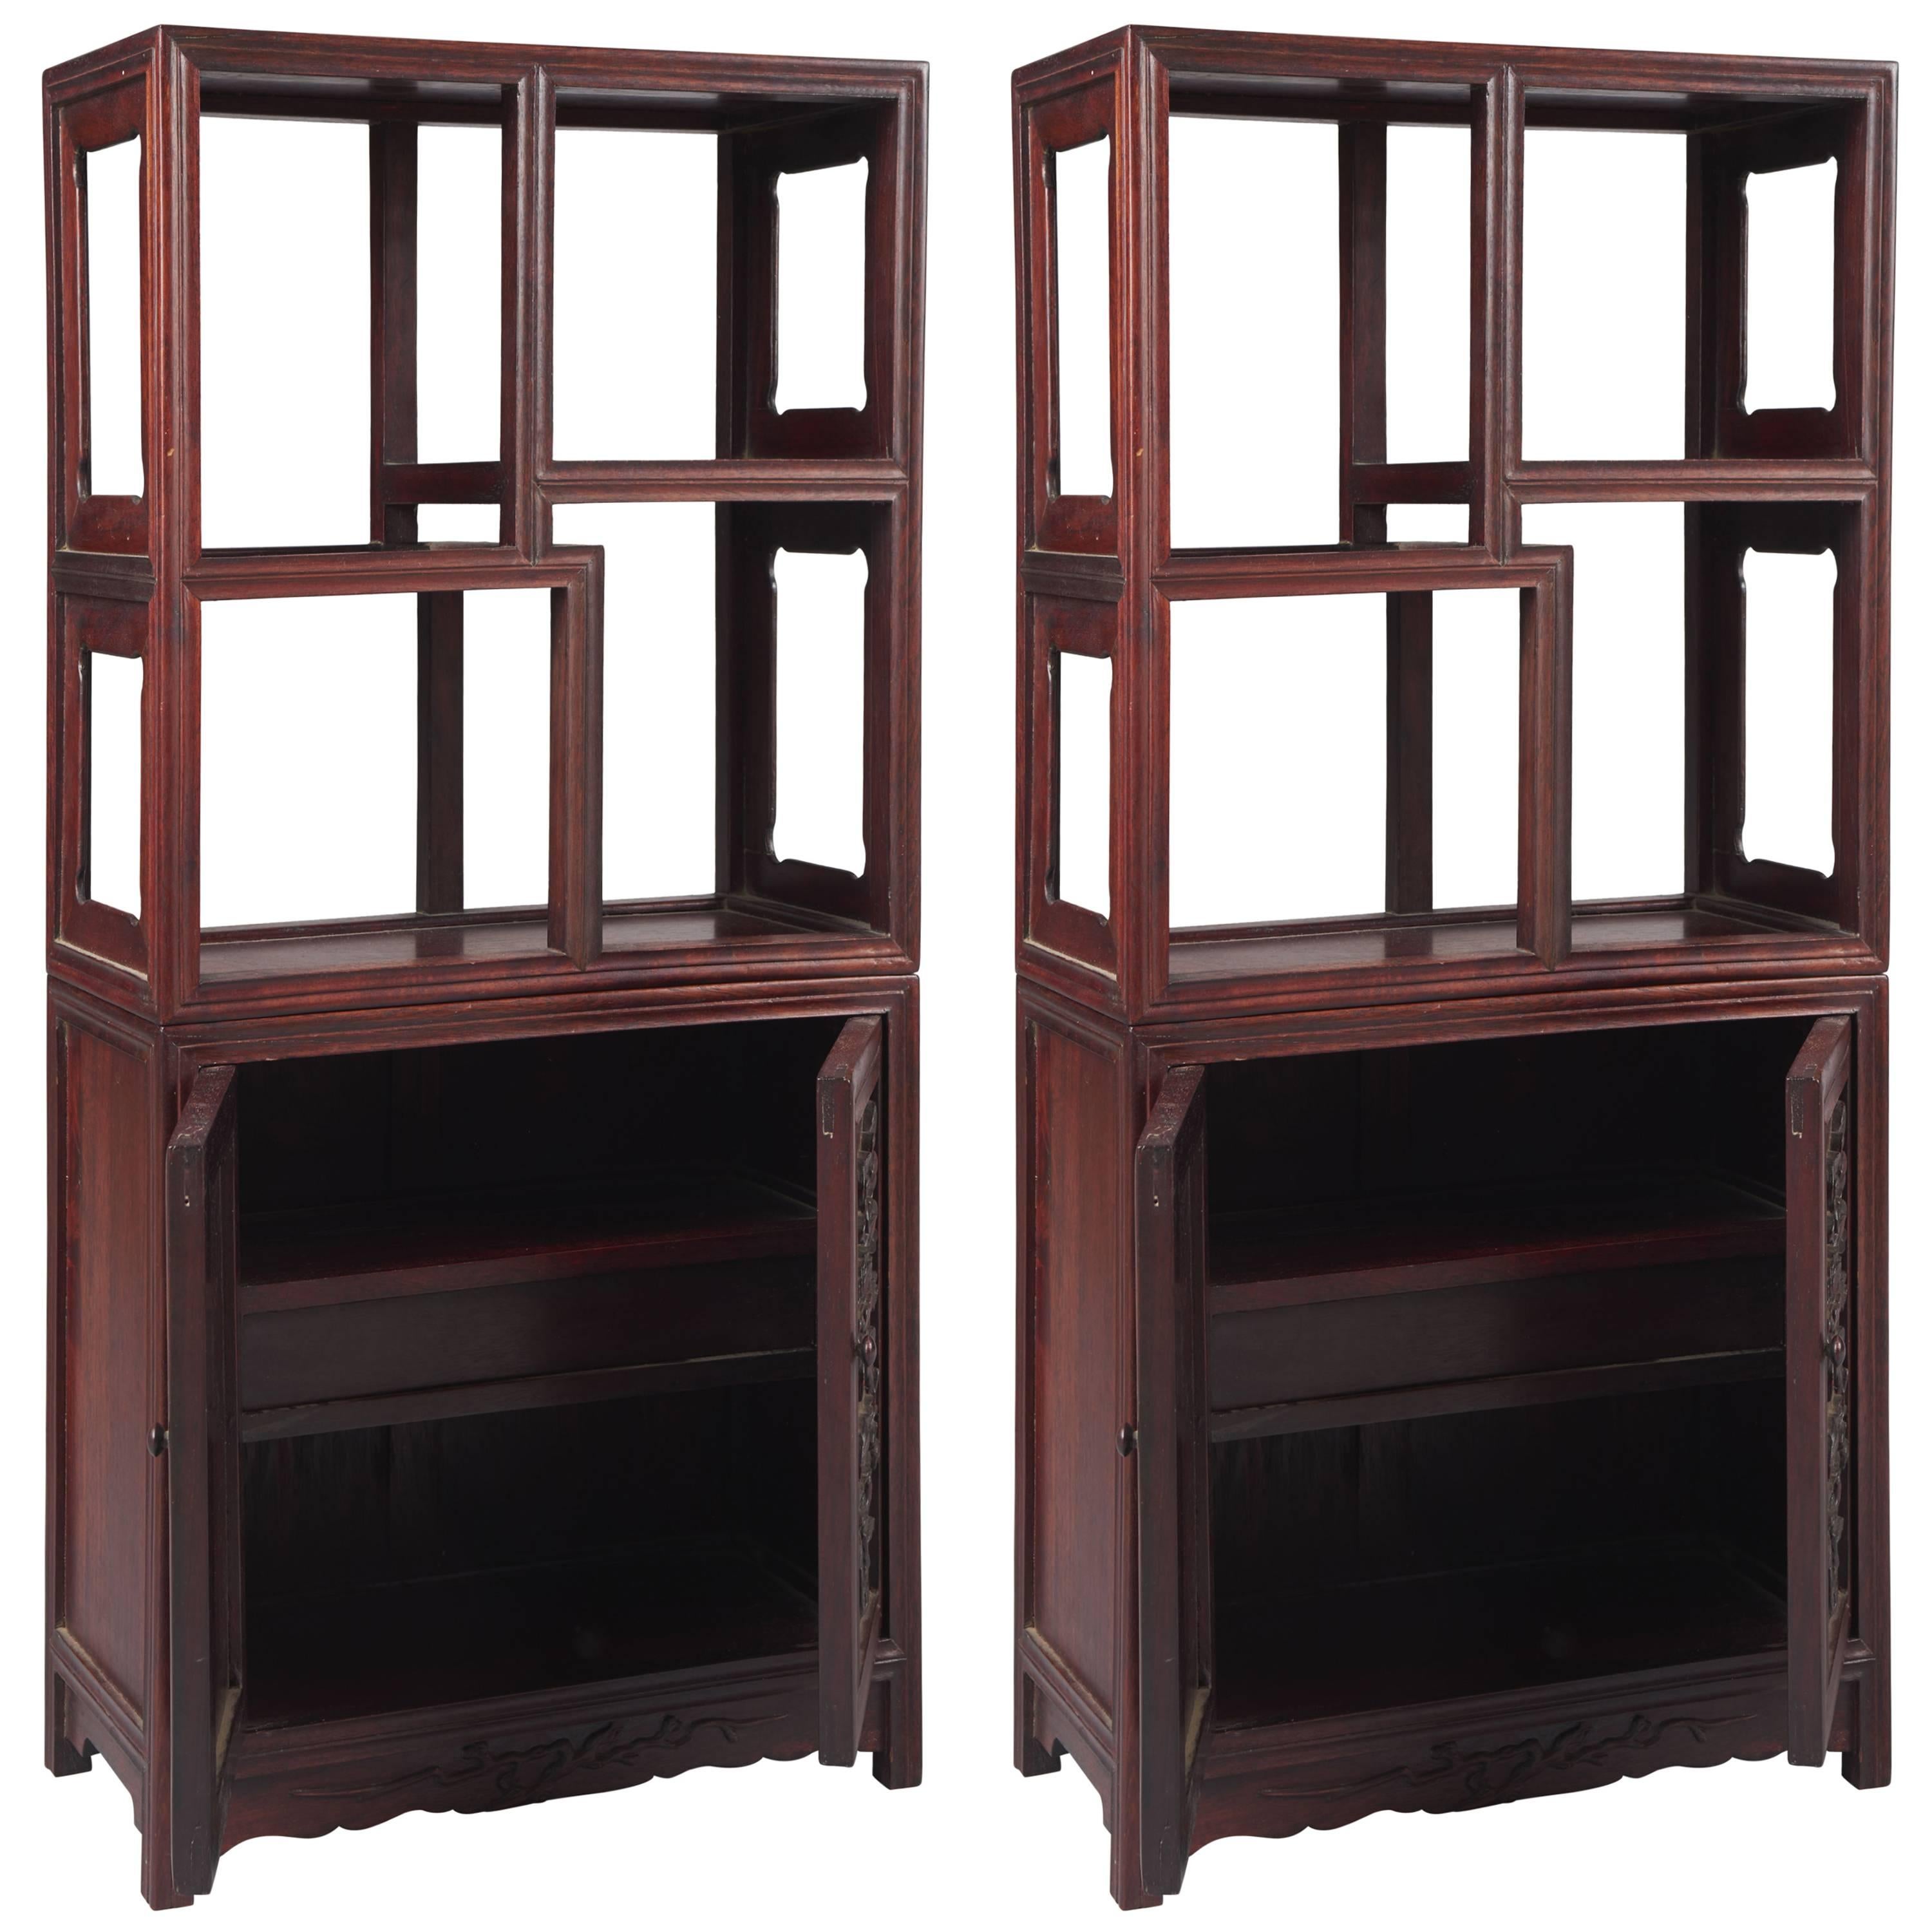 Very Refined Pair of Chinese Shelves, China, Late 19th Century For Sale